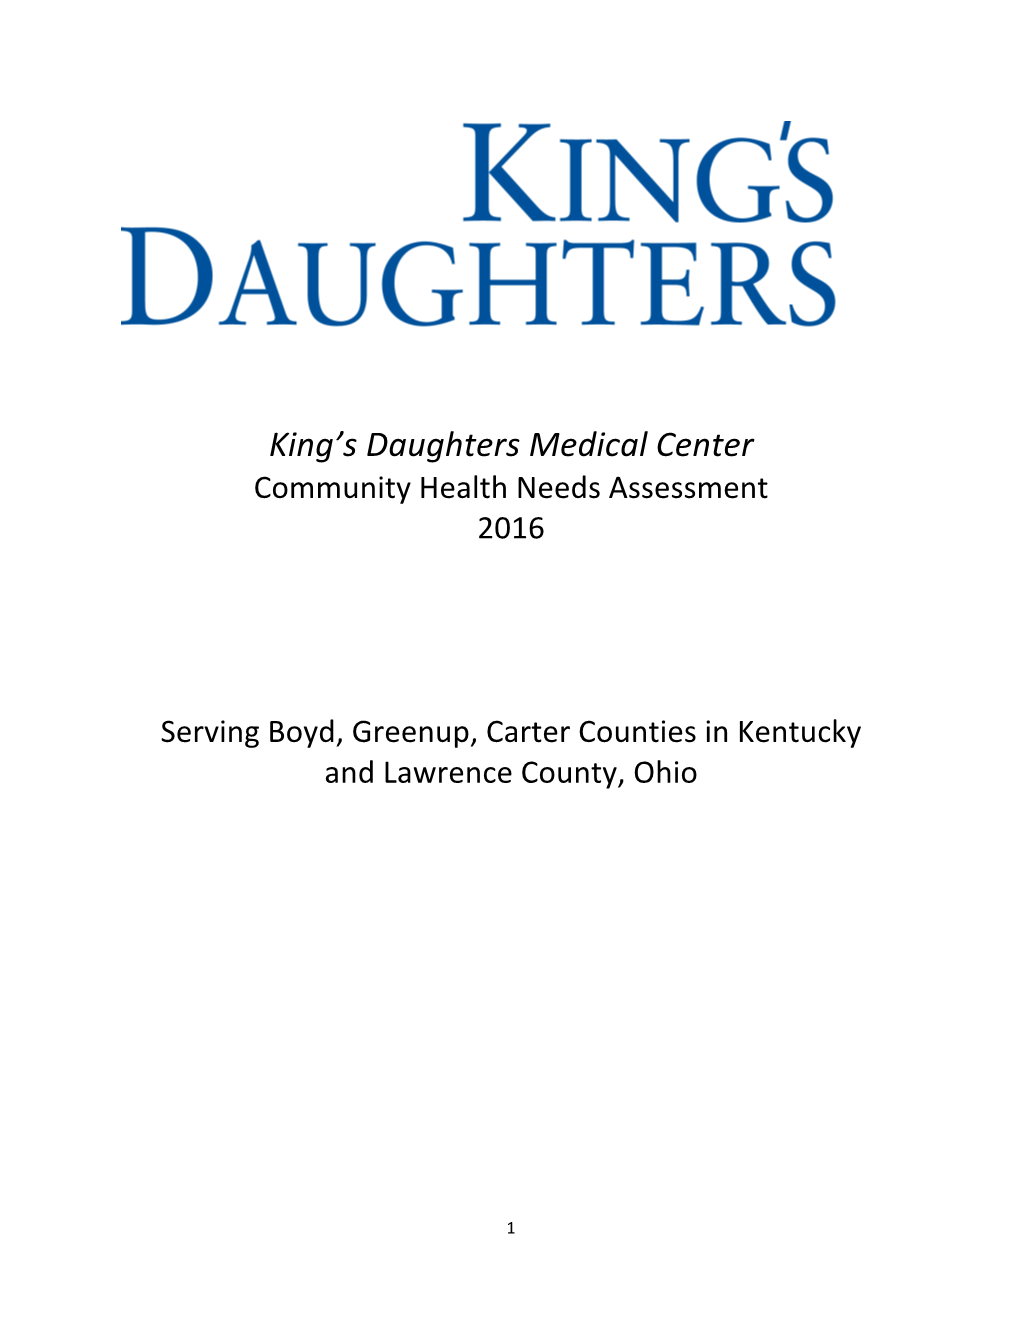 King's Daughters Medical Center, 606-408-9340